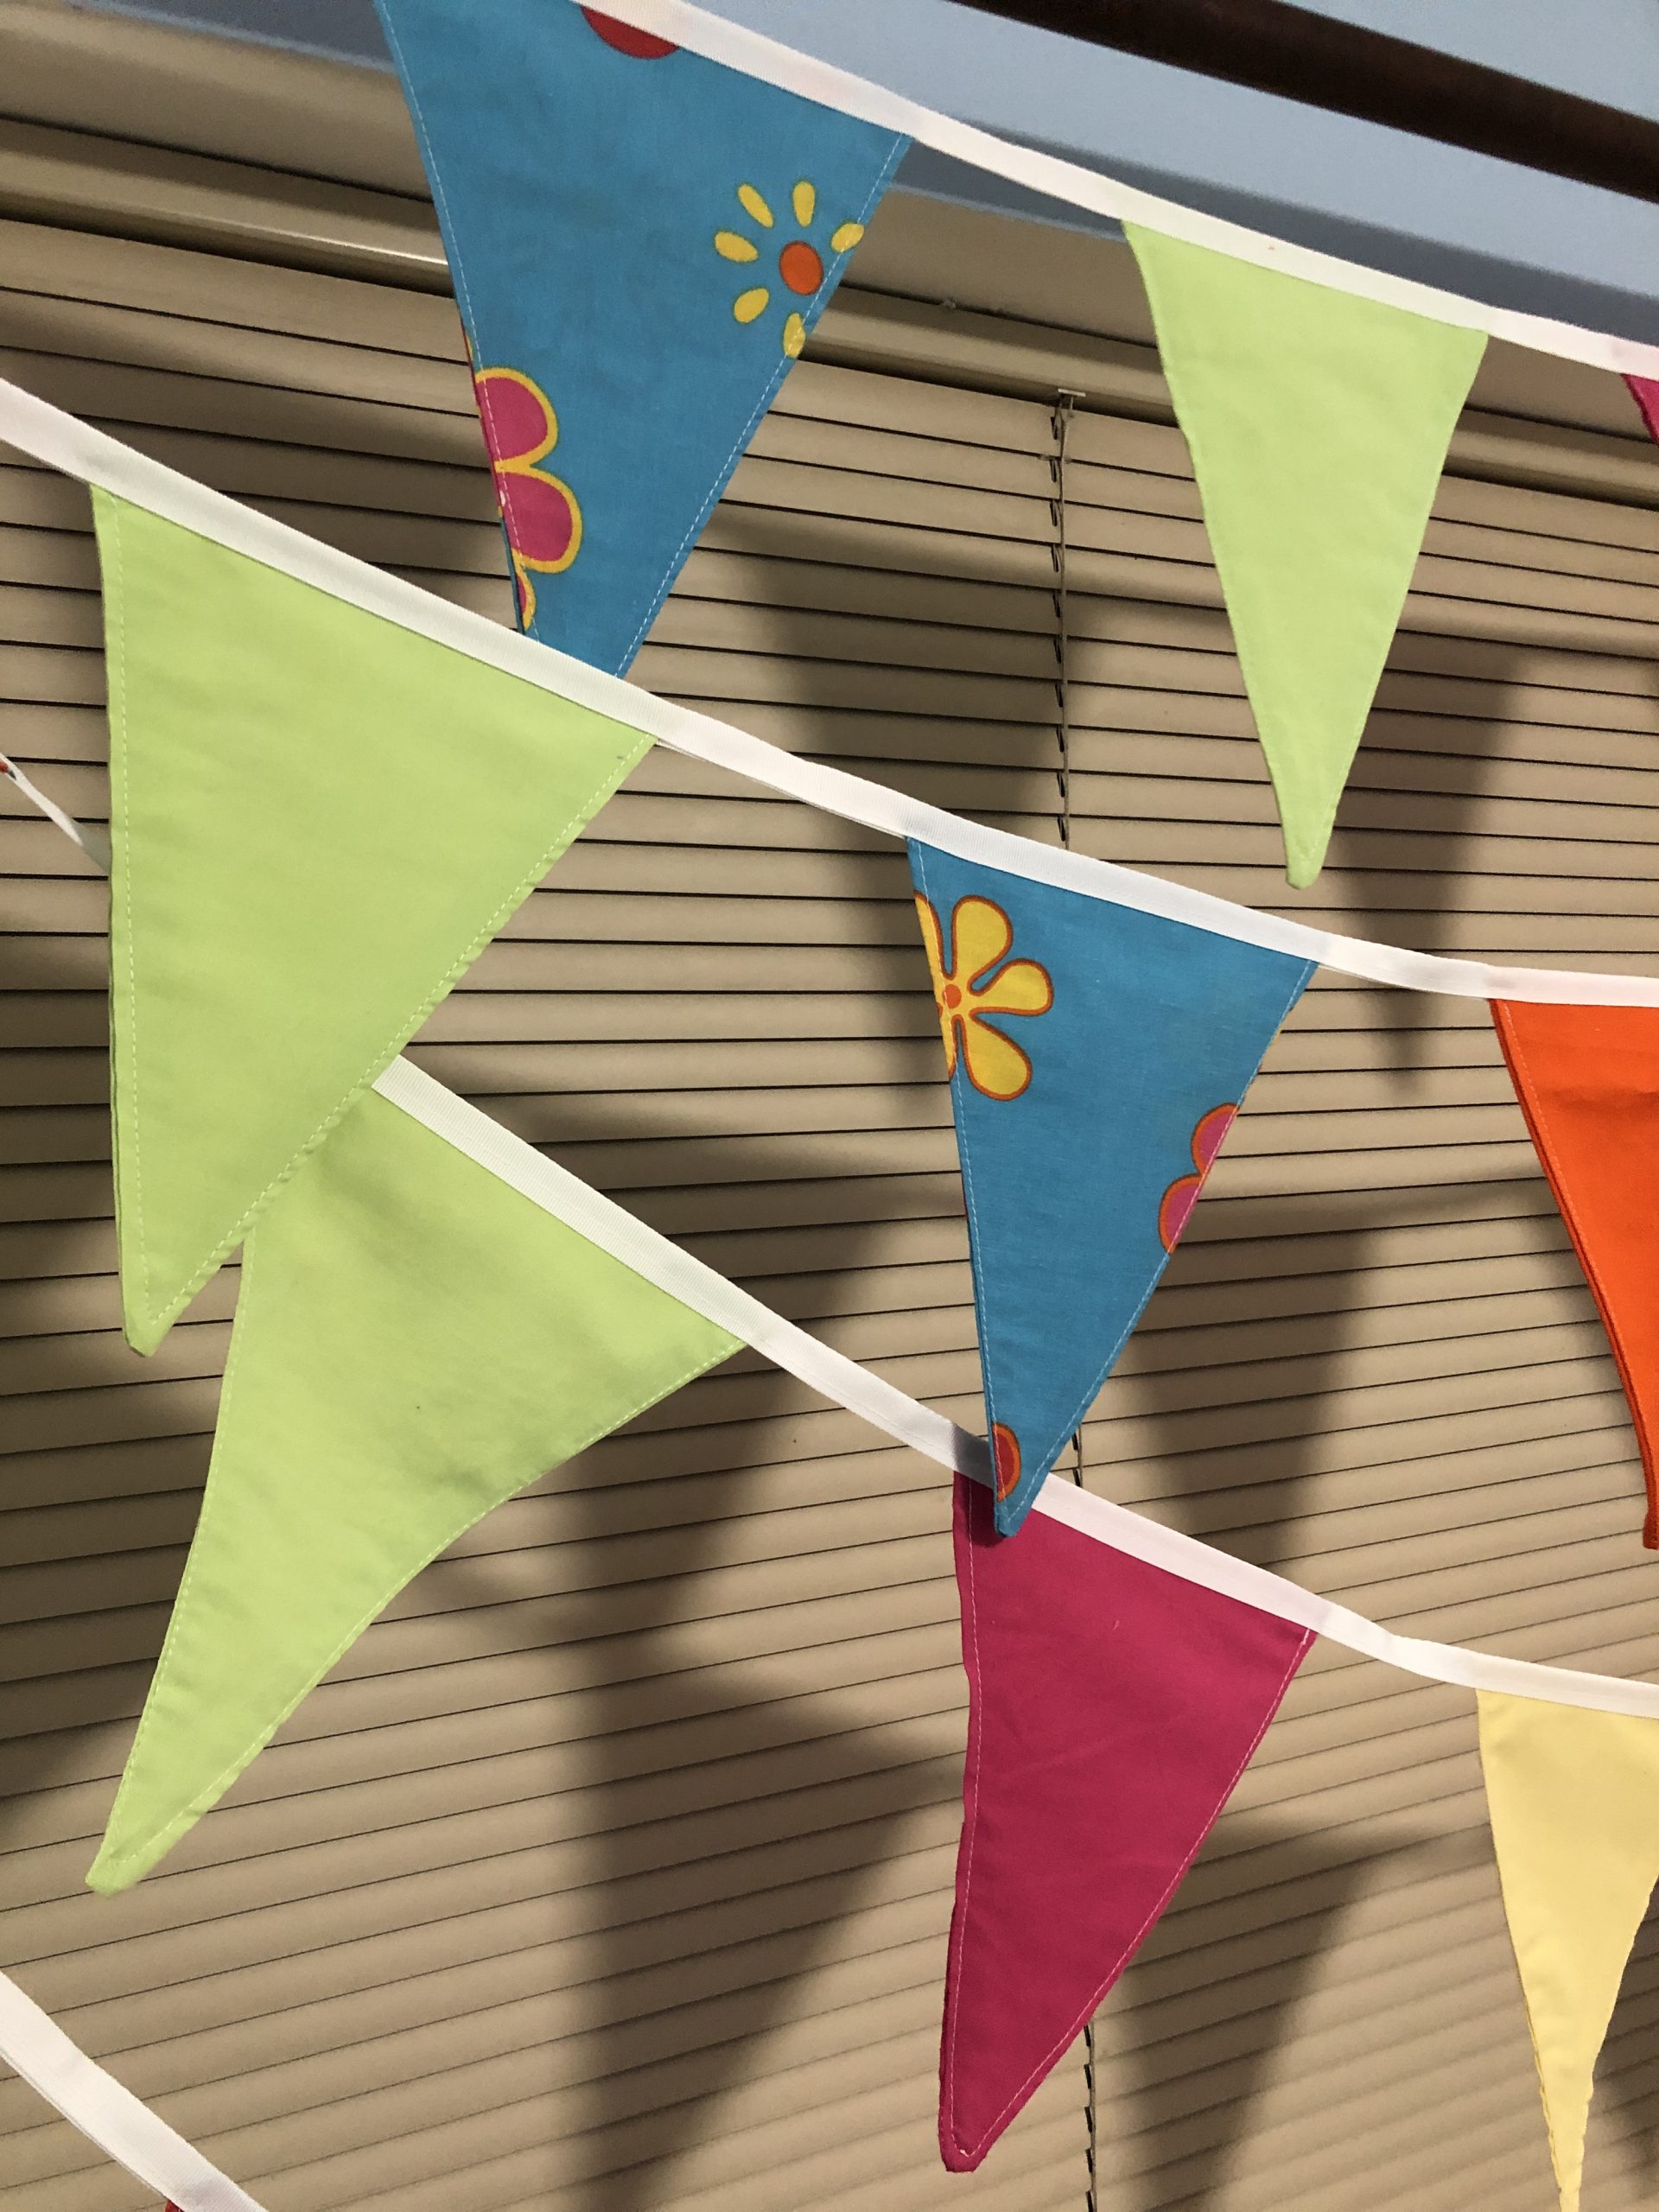 10 meters of brightly coloured bunting. Flags are orange, lime green, bright pink and a 60s style flowered pattern on mid blue.